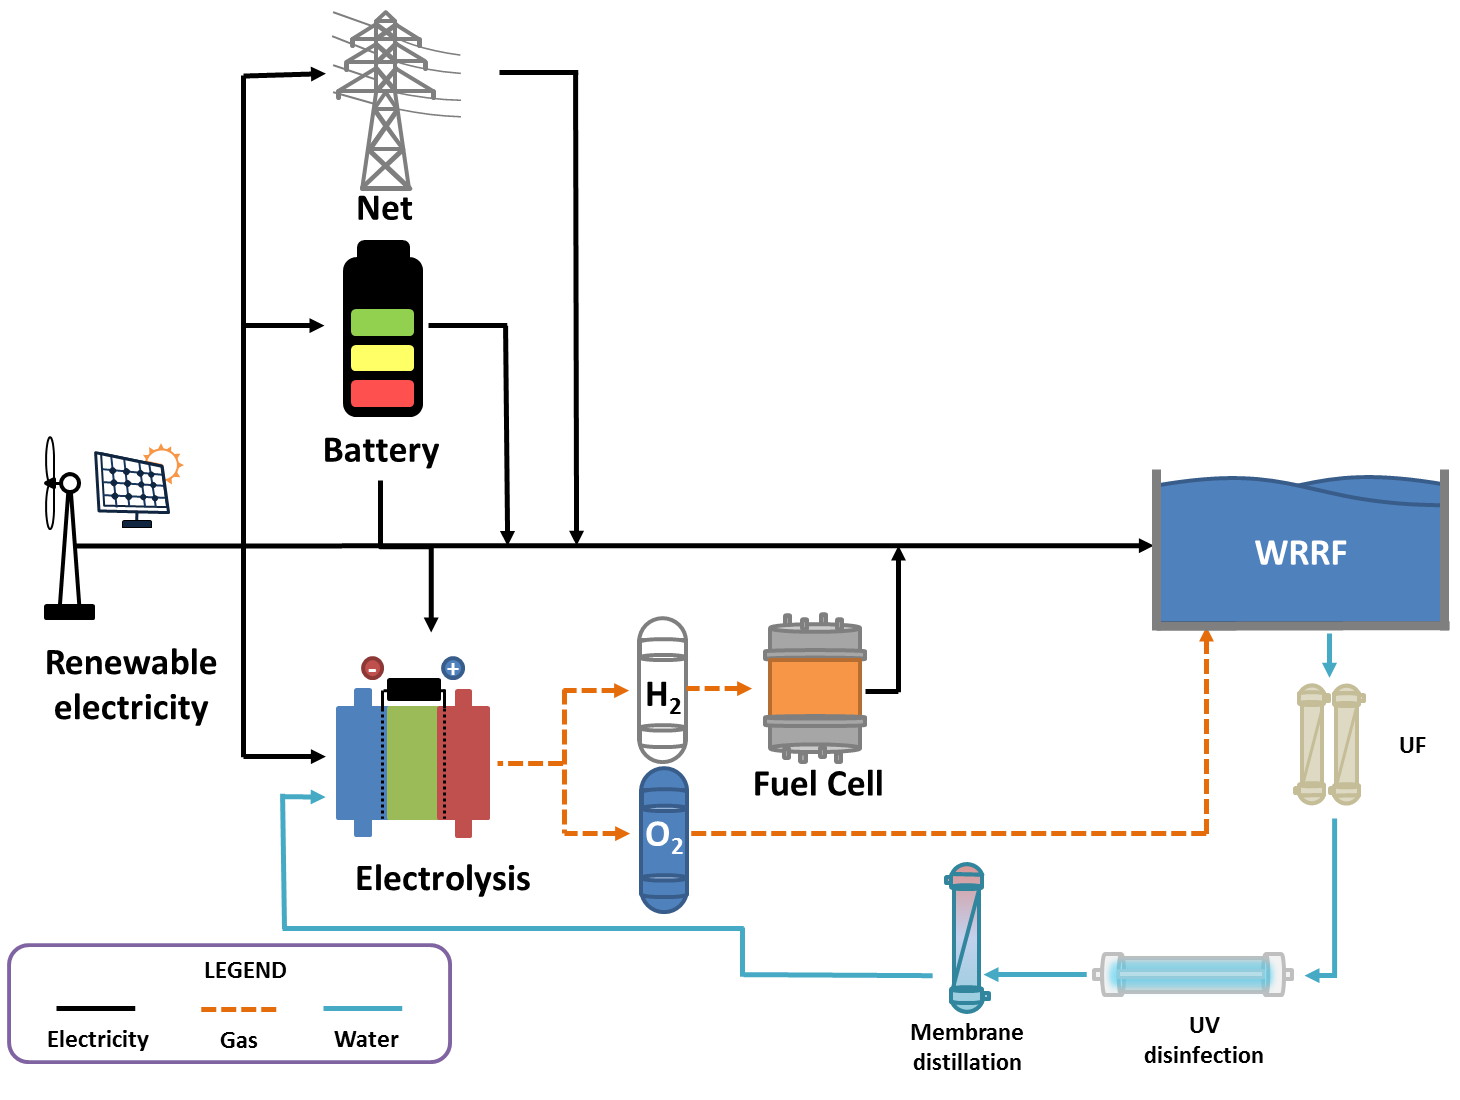 Operation of a Water Reuse Recovery Facility (WRRF) with renewable electricity and water electrolysis